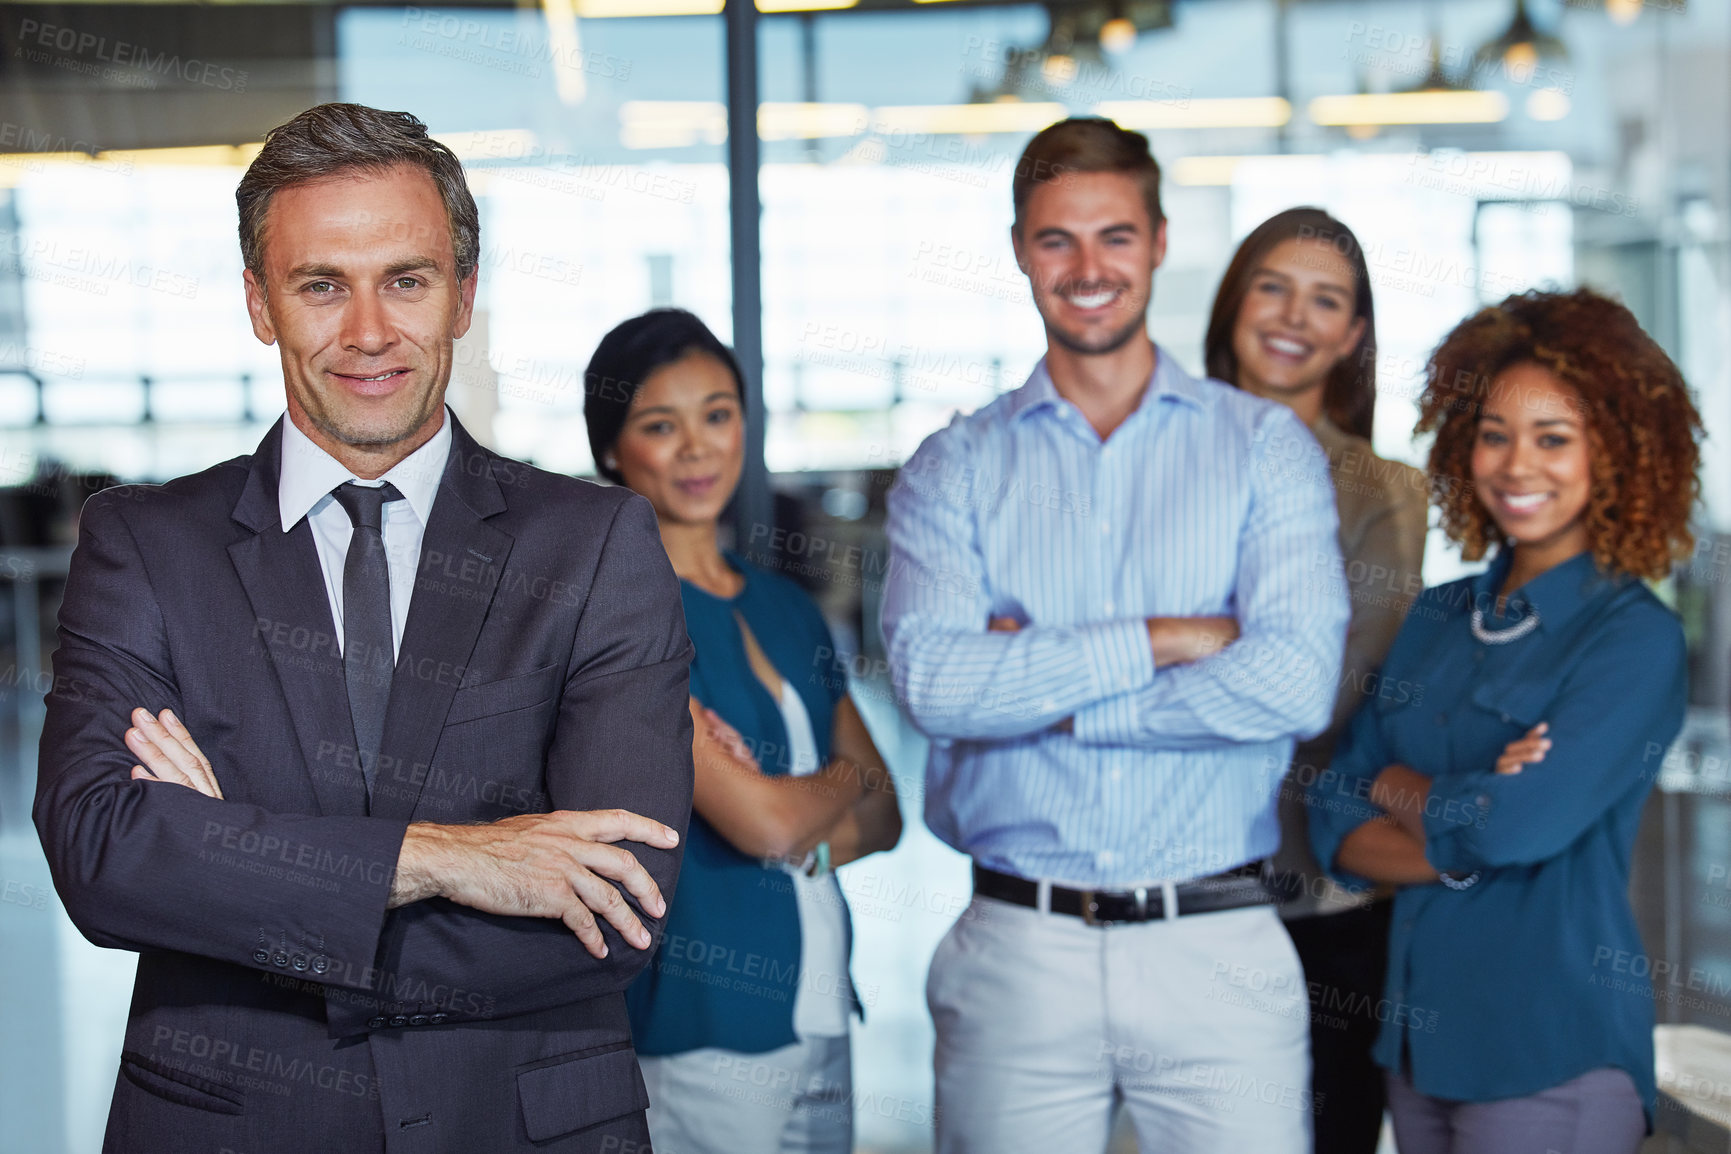 Buy stock photo Portrait of a team of professionals standing together in an office